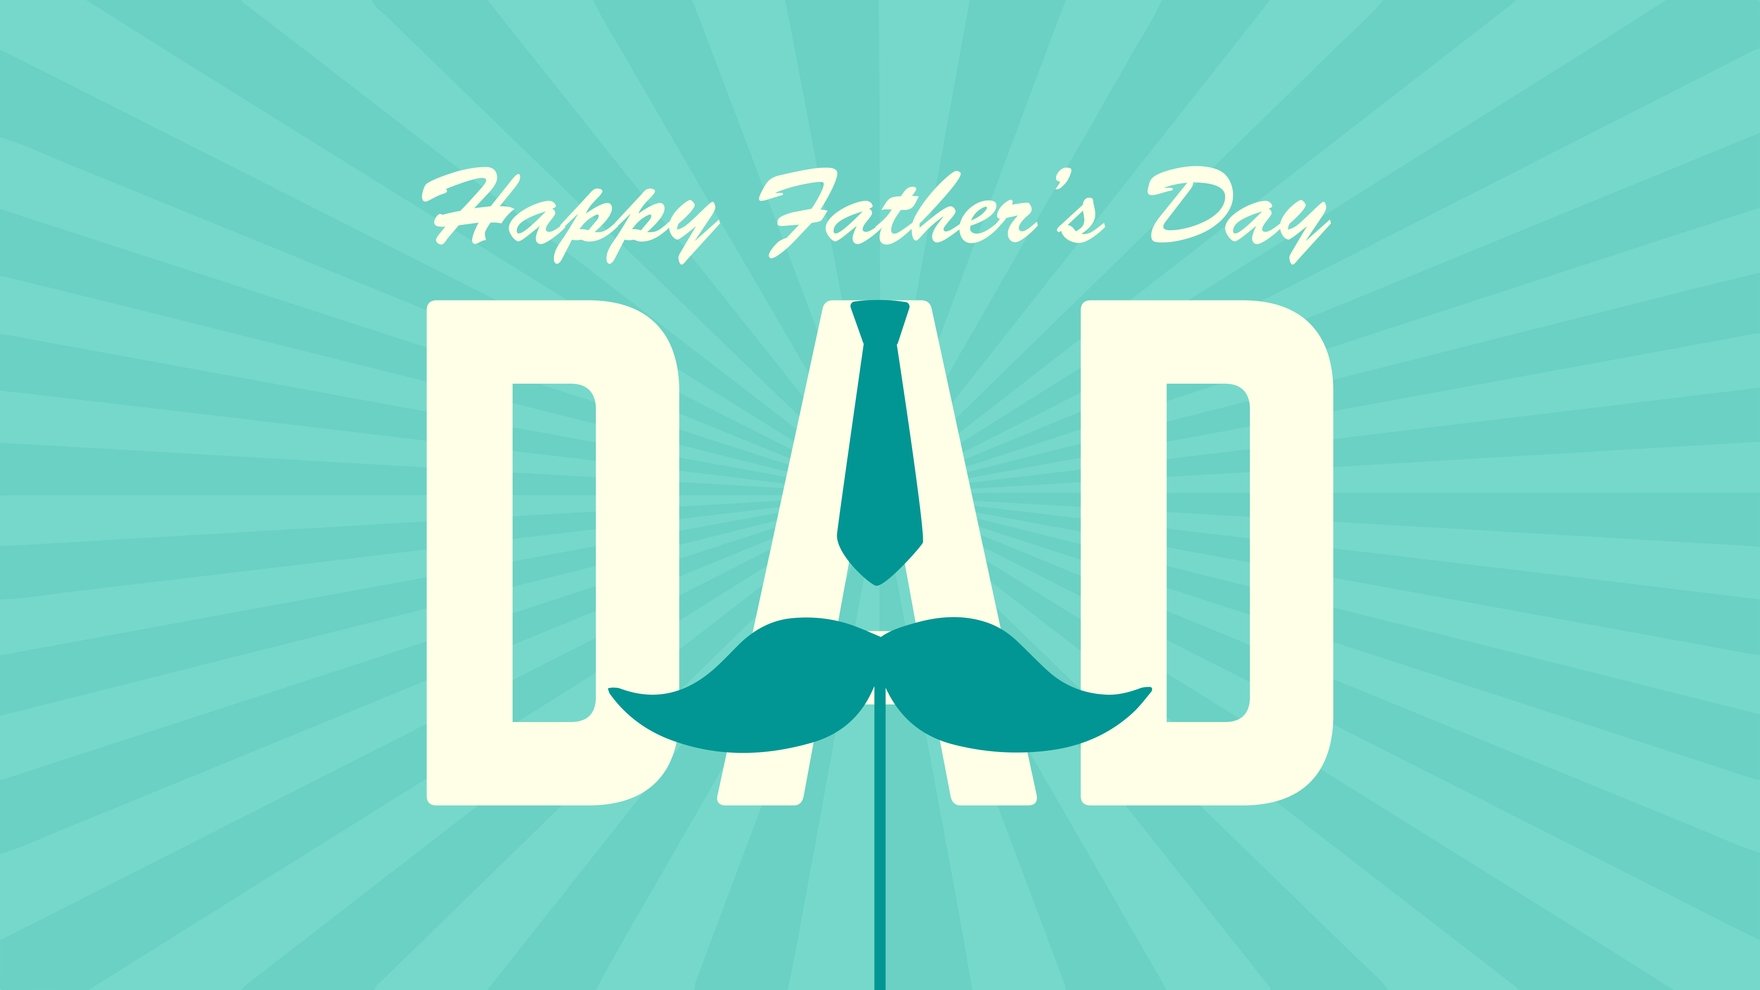 Free Green Father's Day Background in Illustrator, EPS, SVG, JPG, PNG